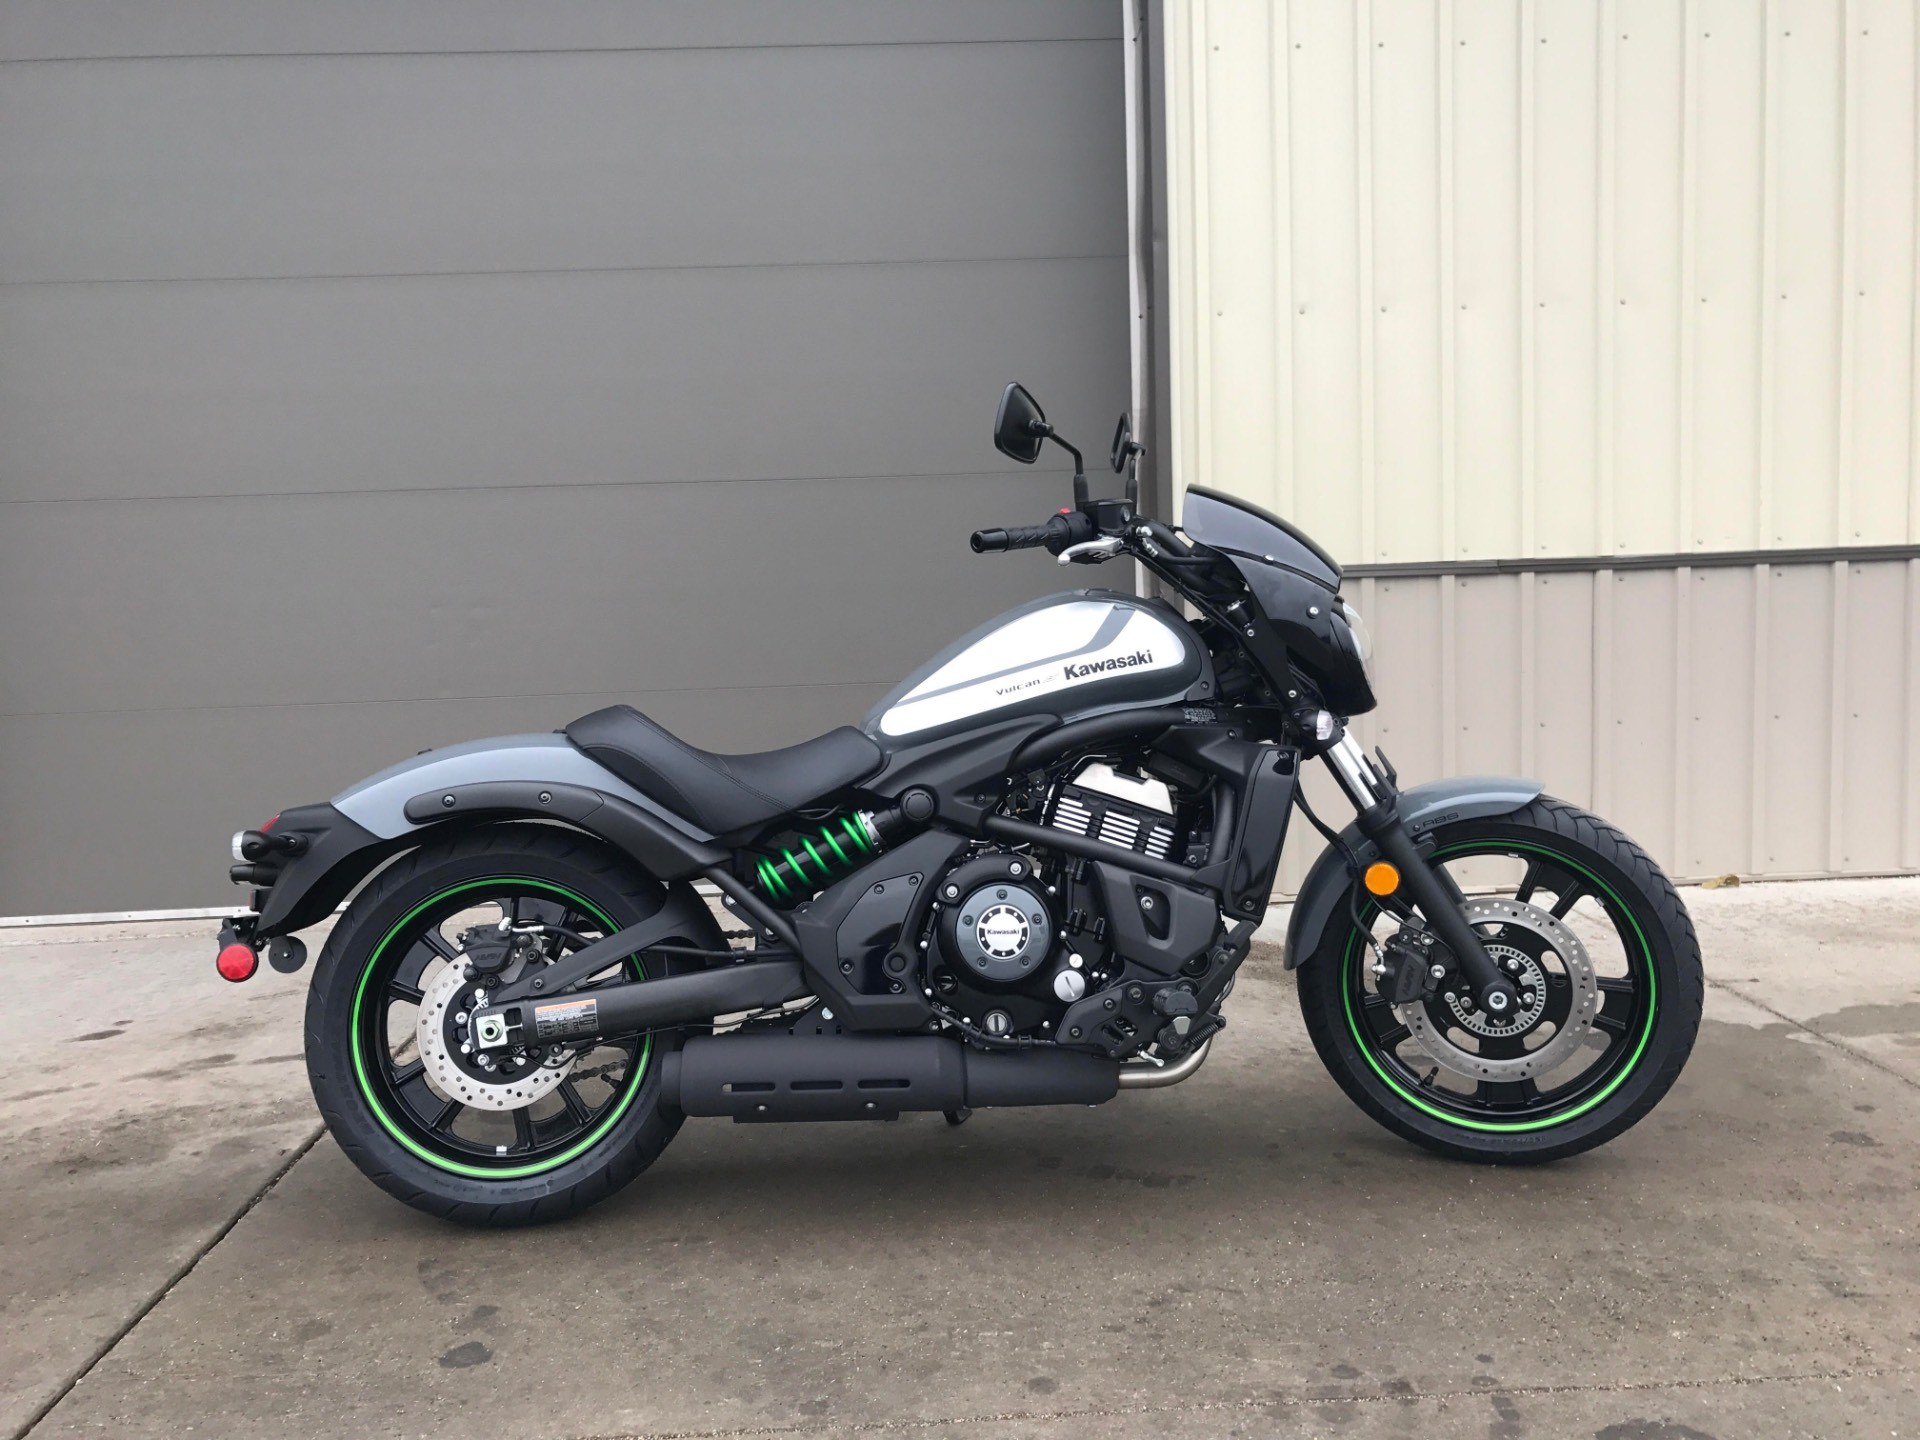 Review of Kawasaki Vulcan S ABS Cafe 2018: pictures, live photos ...